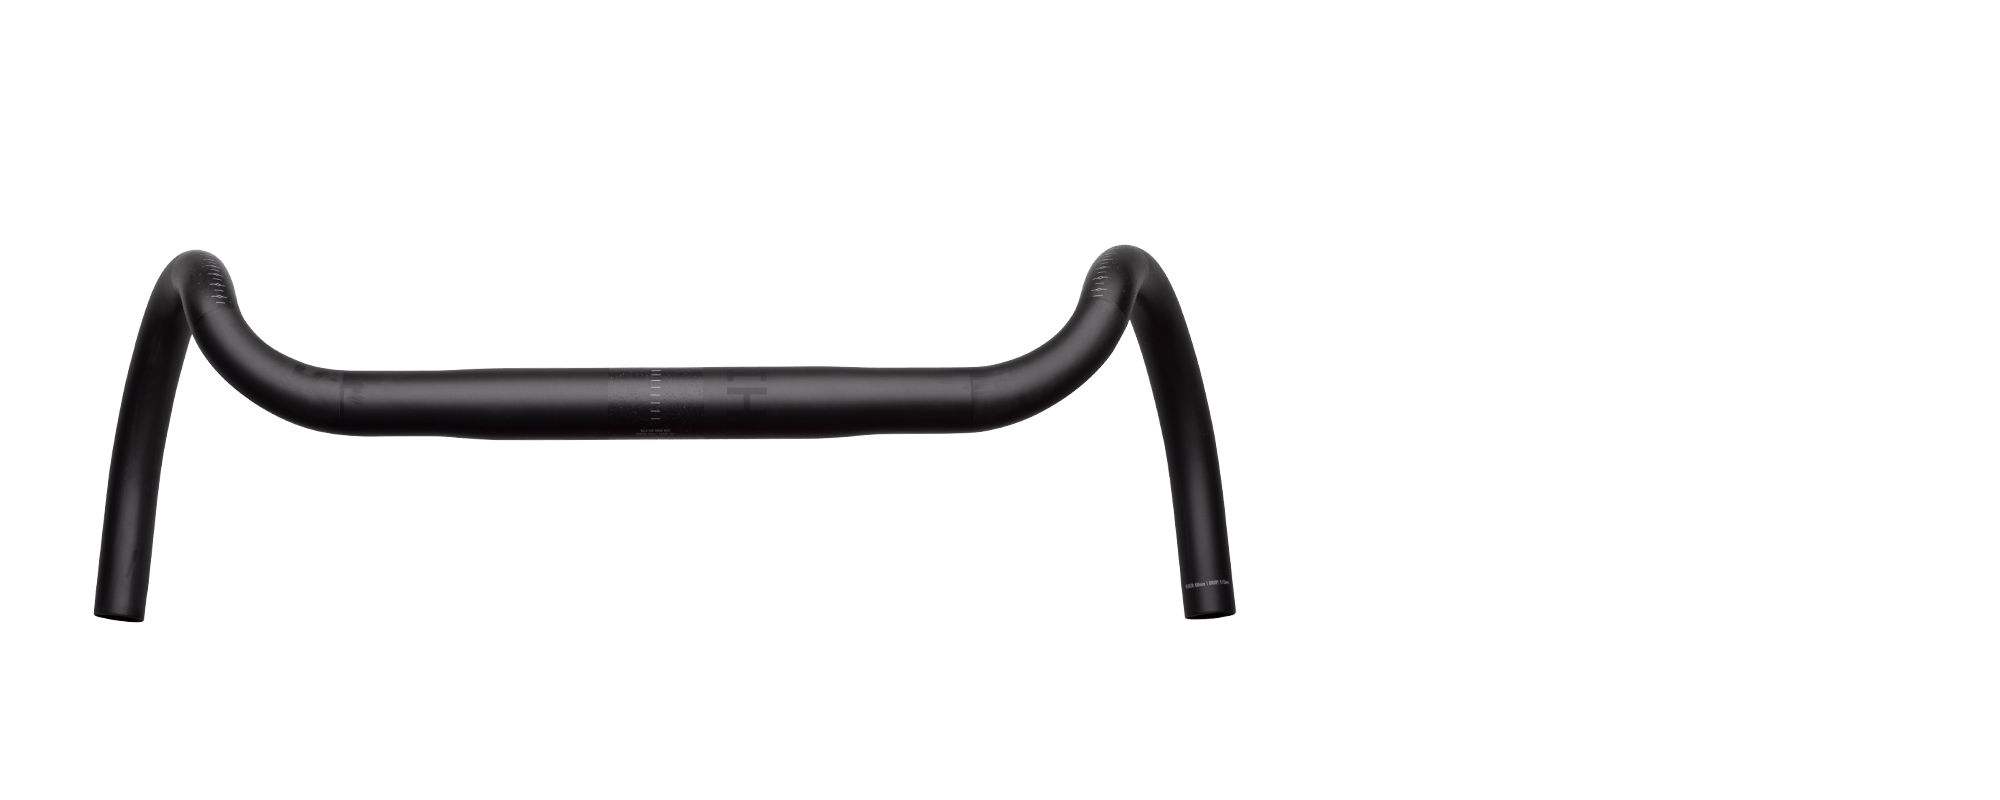 Whisky No9 24F Handlebar - Black - shown from the back